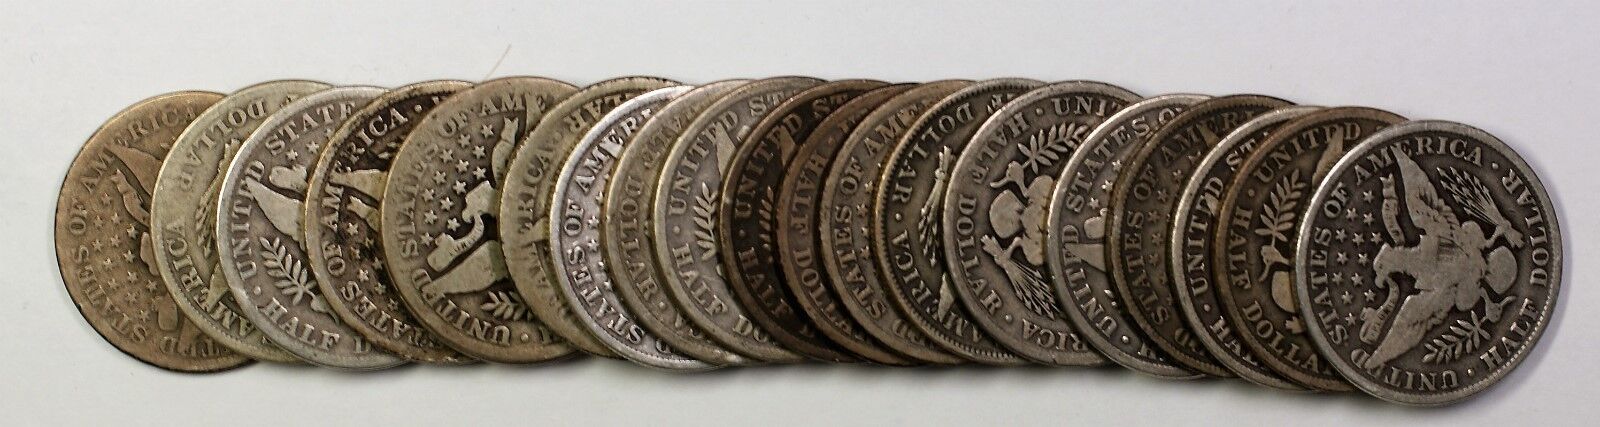 1915-D Barber Half Dollar 50c Roll 20 Circulated 90% Old Silver Coins Lot